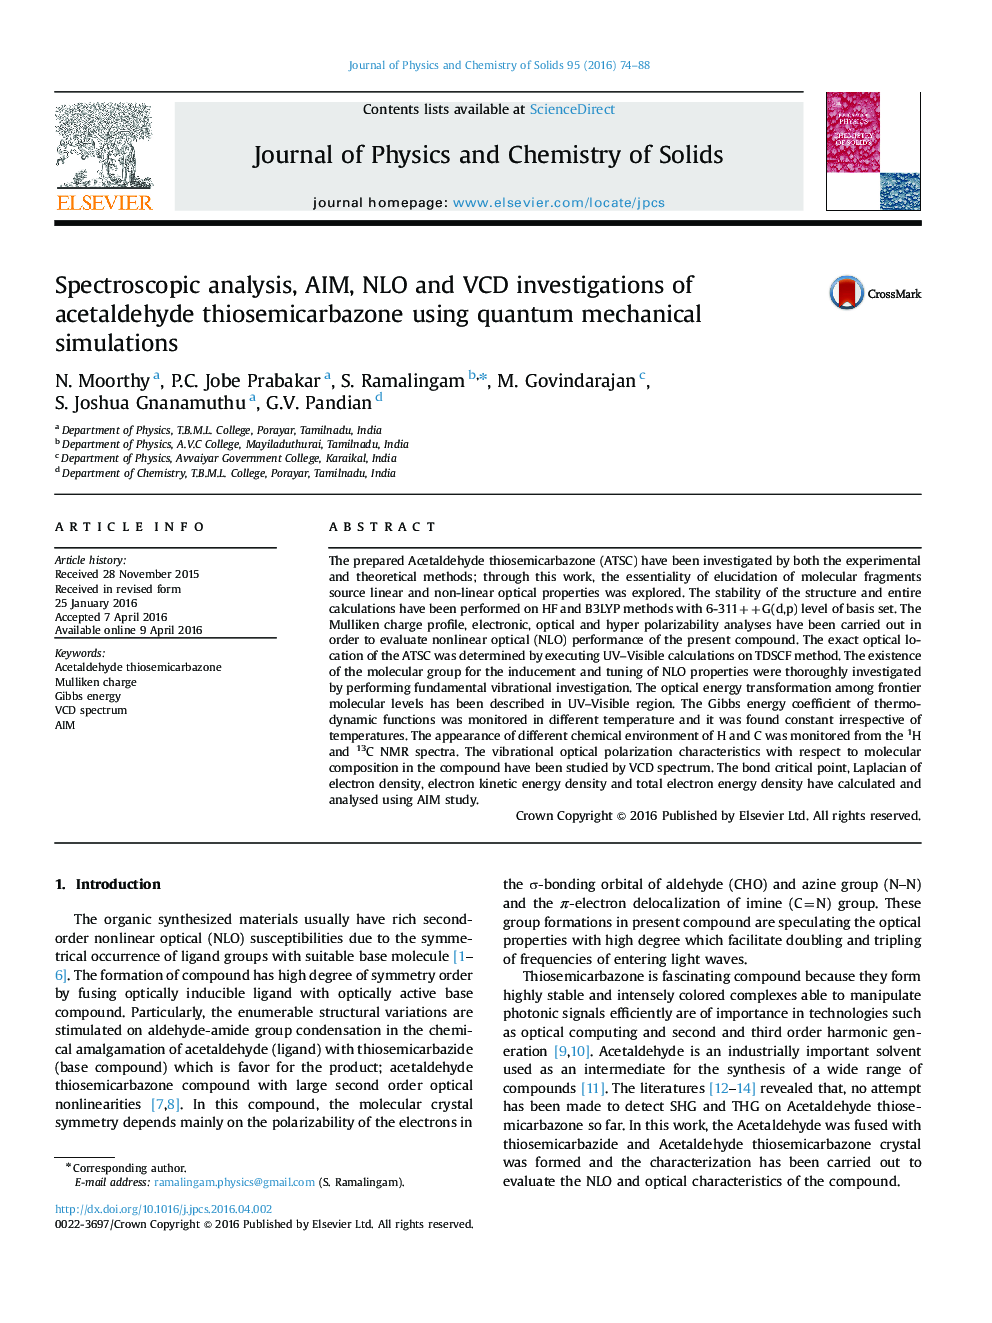 Spectroscopic analysis, AIM, NLO and VCD investigations of acetaldehyde thiosemicarbazone using quantum mechanical simulations